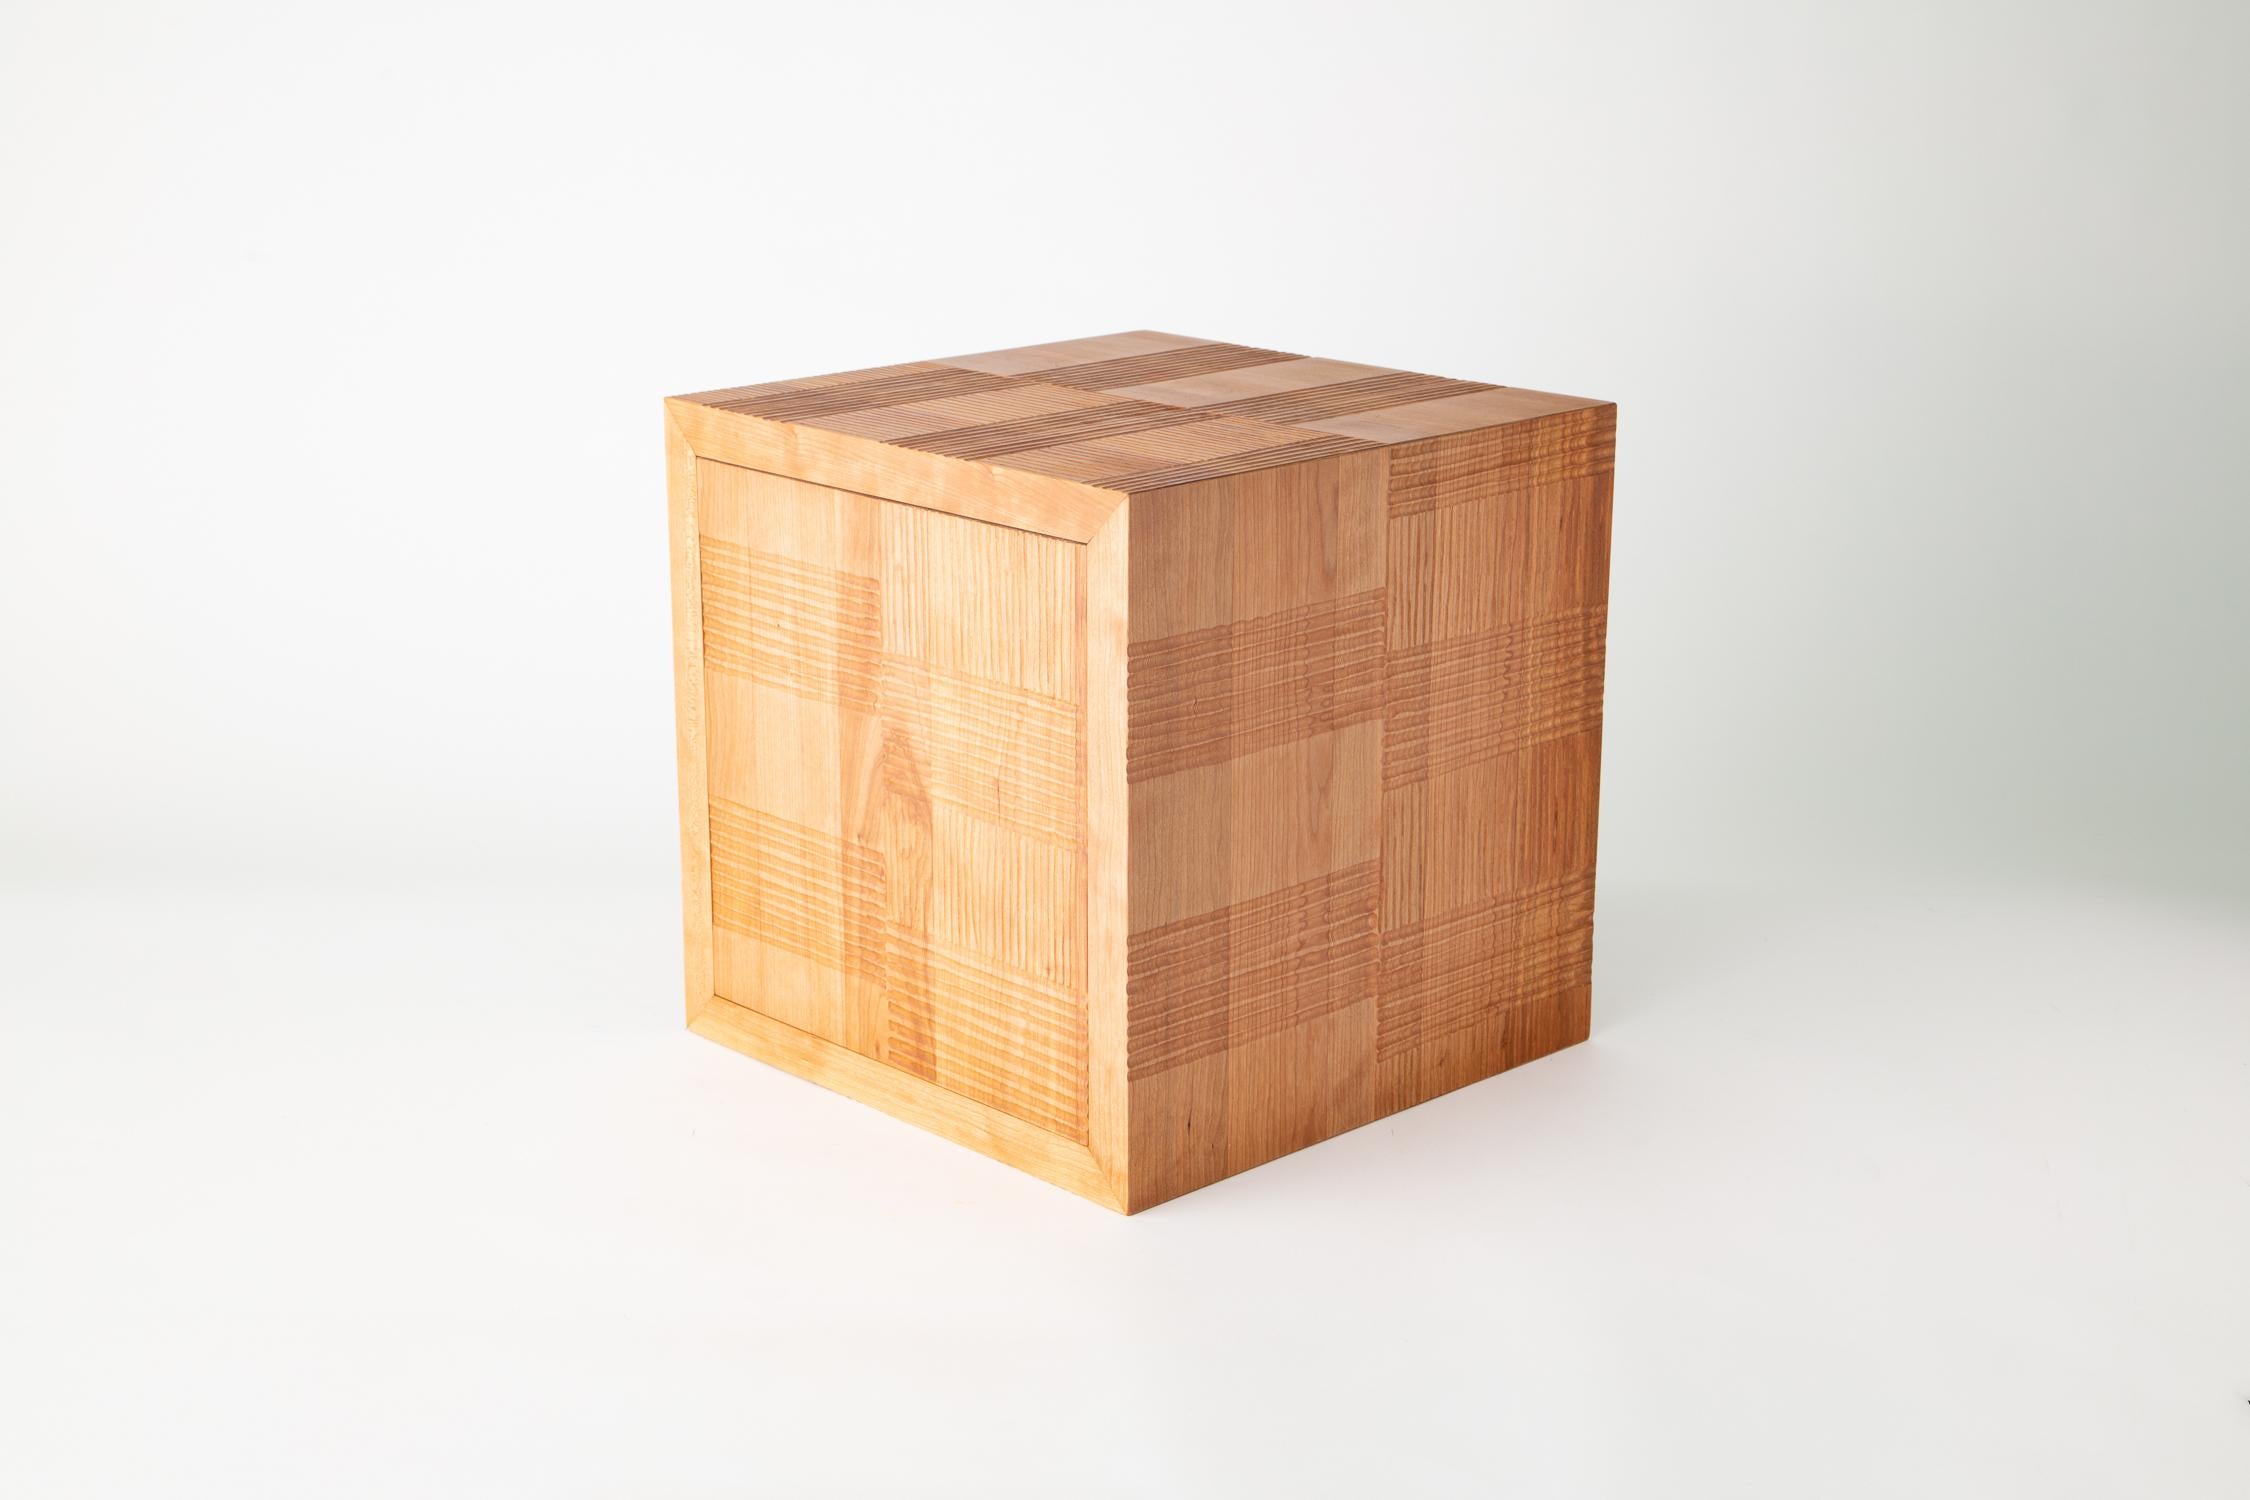 Carved lines wooden cube, cherry striped lines

Noah James Spencer's wooden cubes are minimalist sculptures. Made in plain or carved patterned wood, they easily stand alone in a room, yet in multiples they become taller towers or room dividers.